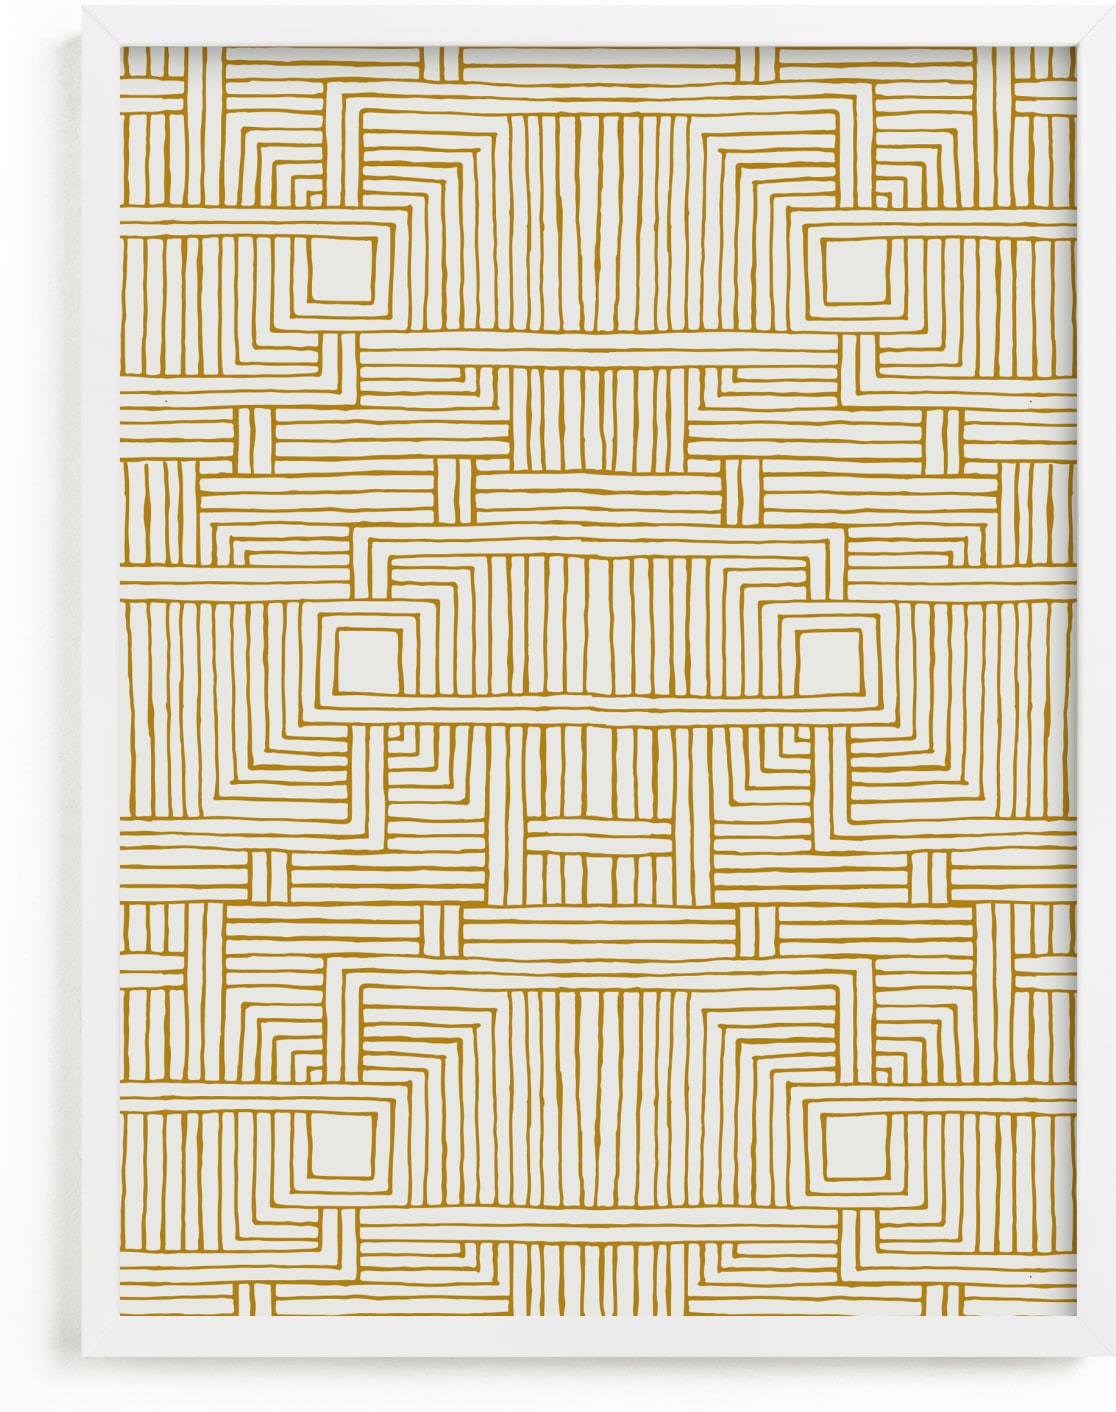 This is a yellow art by Katie Zimpel called Weaving Doodle.